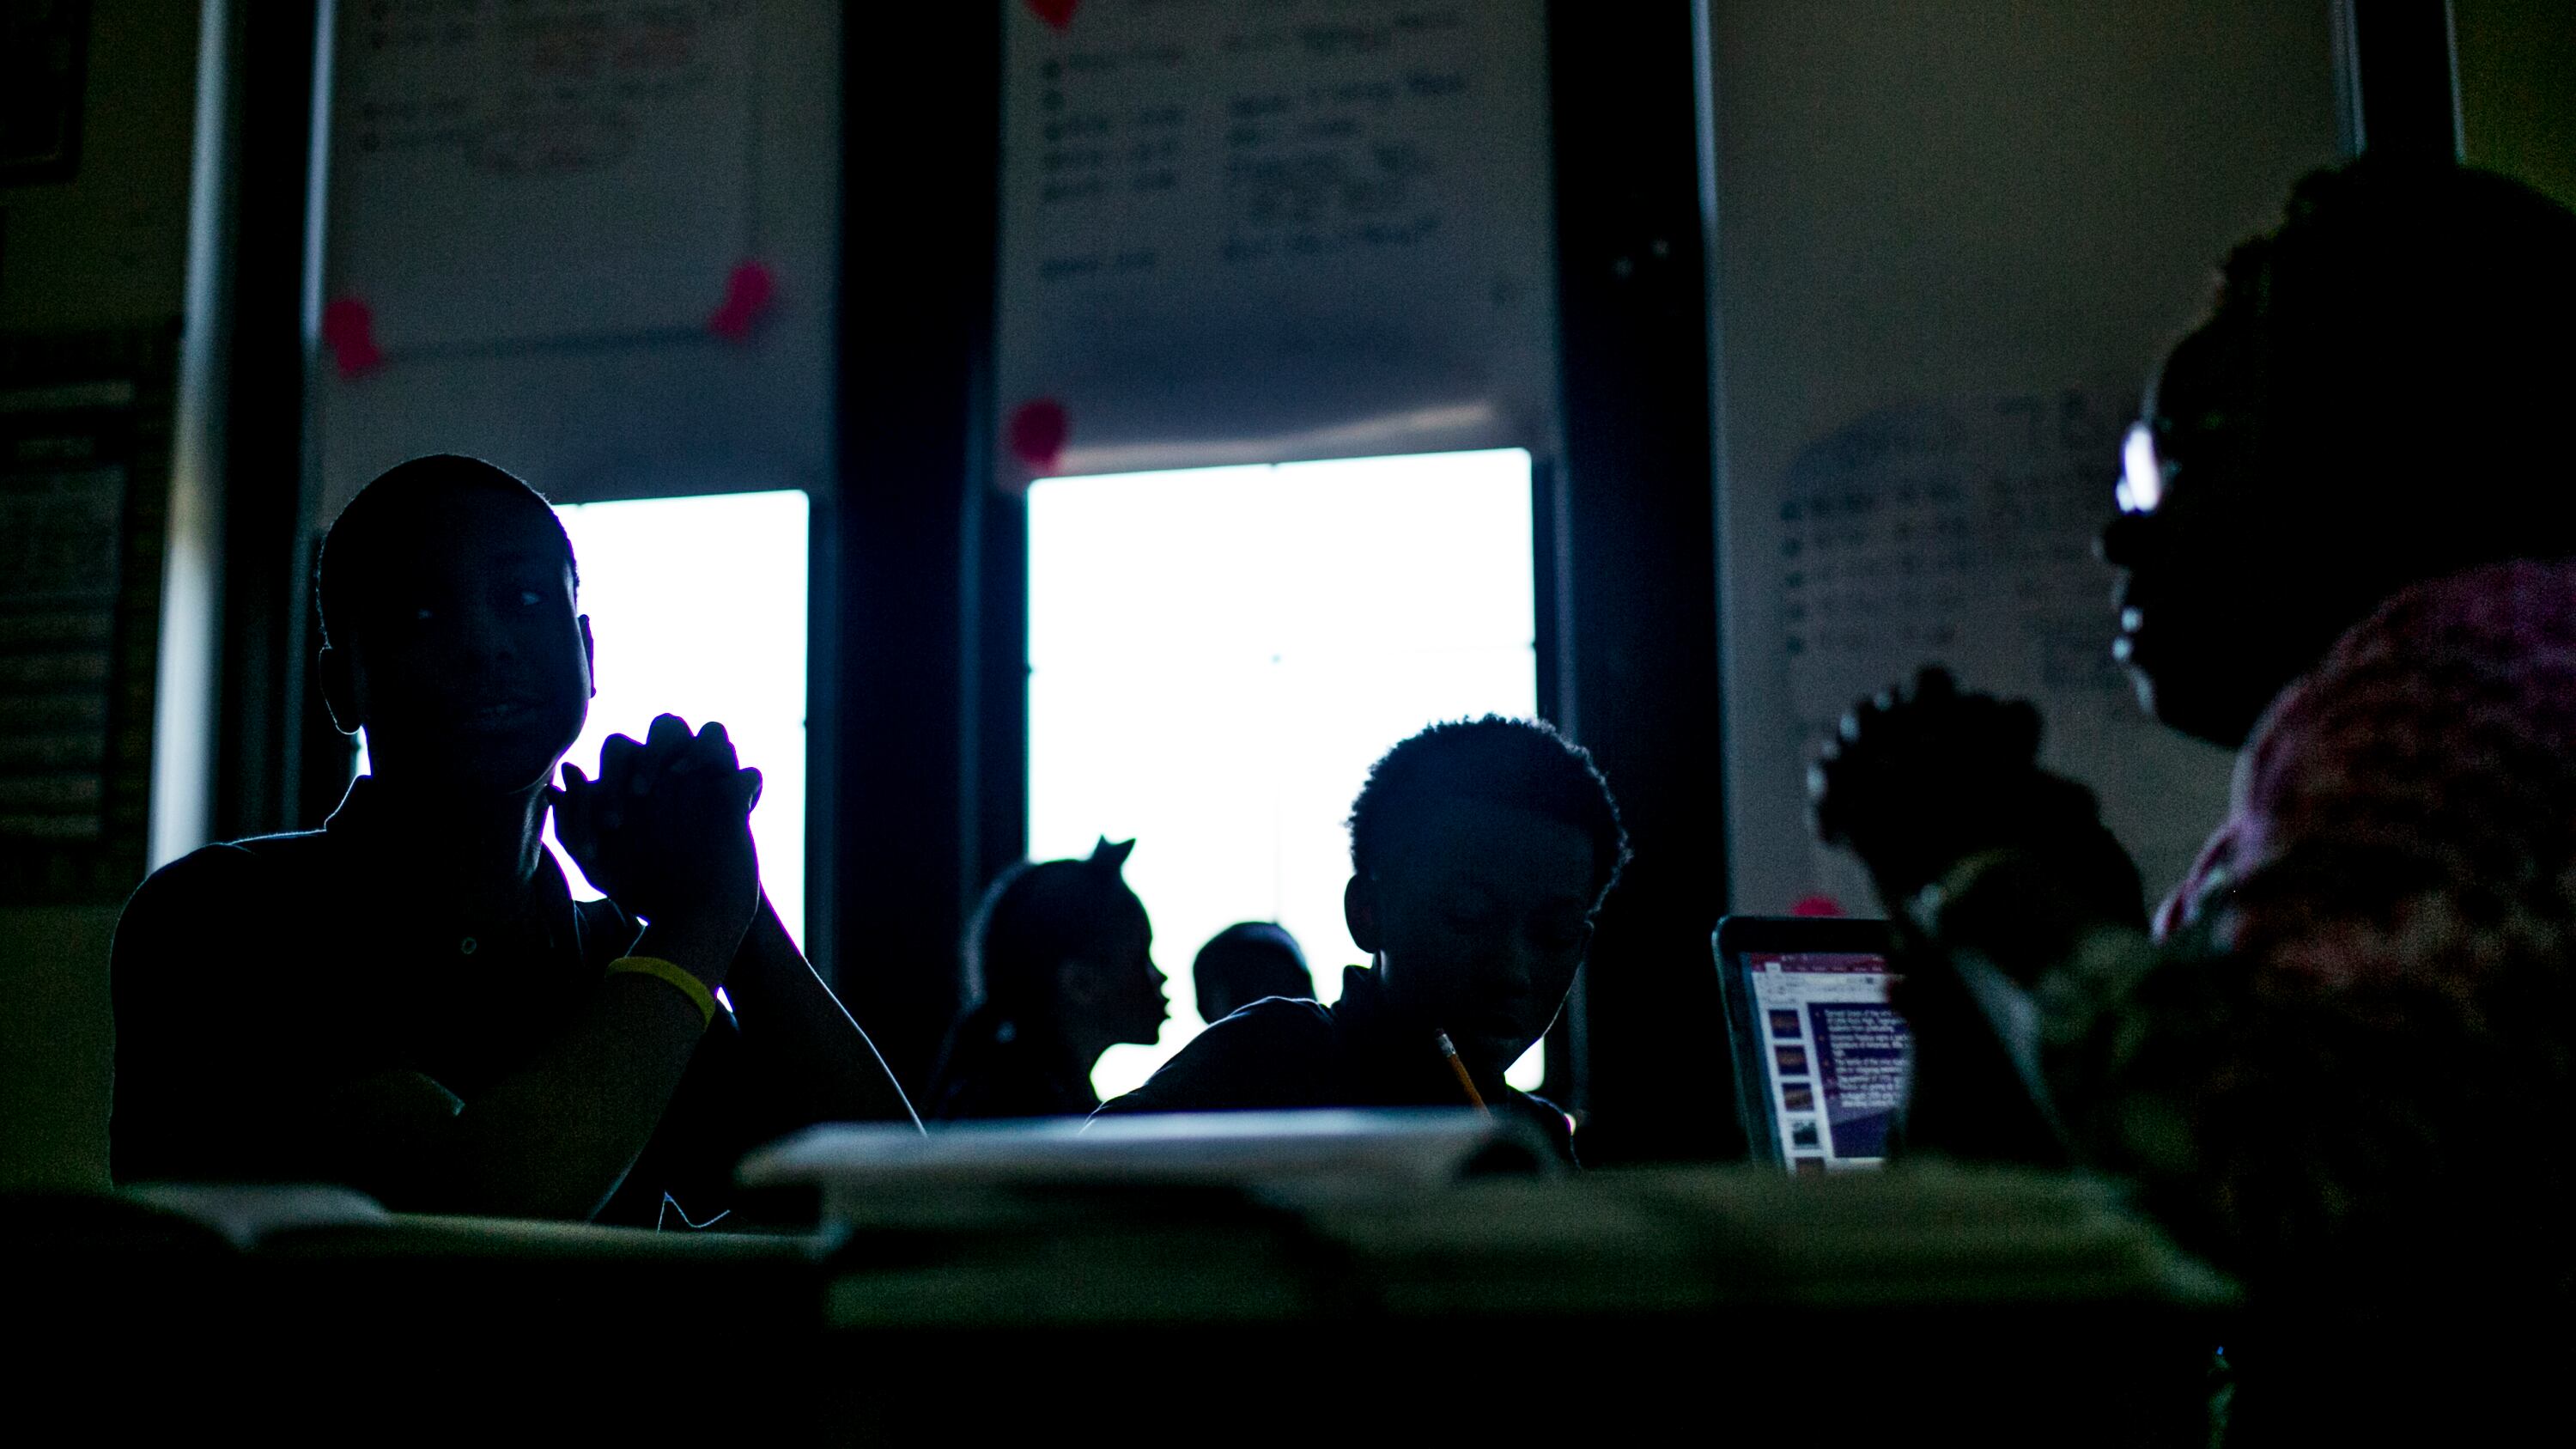 Students and their teacher sit in a dark classroom, the students silhouetted against the windows.